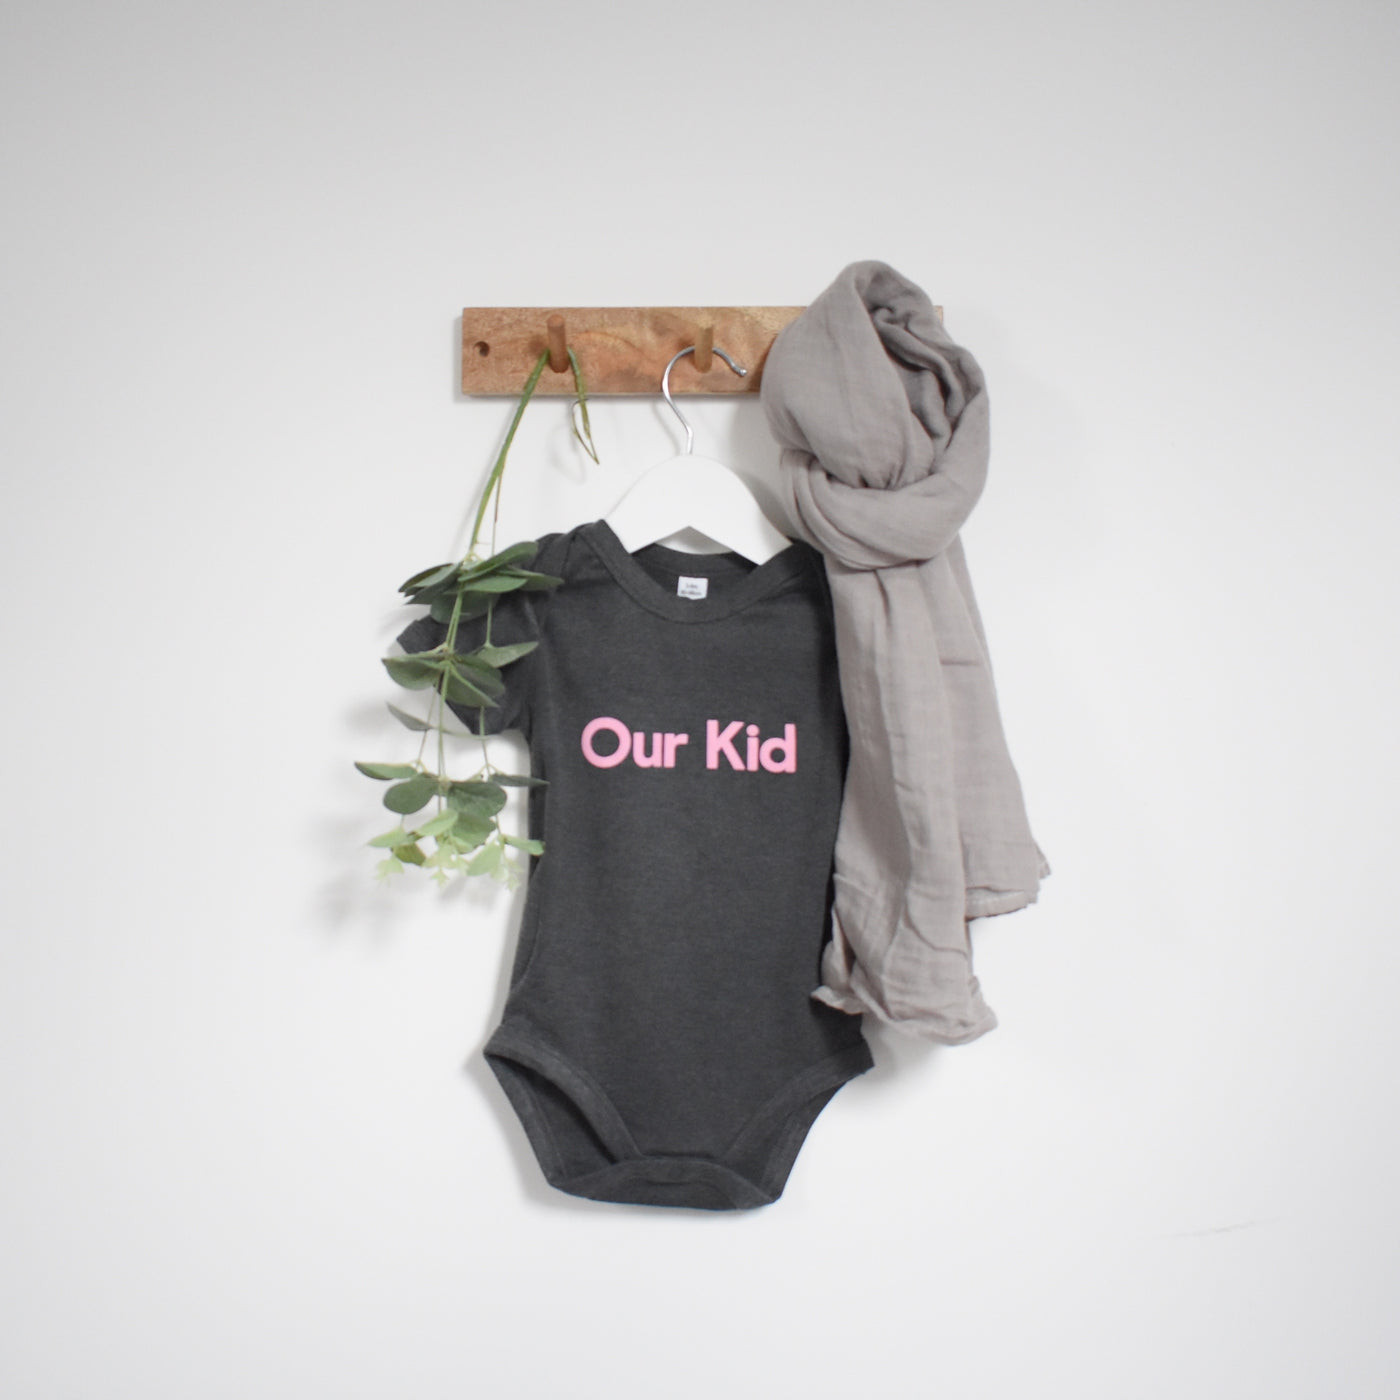 Our Kid Slogan Vest in Charcoal+Pink